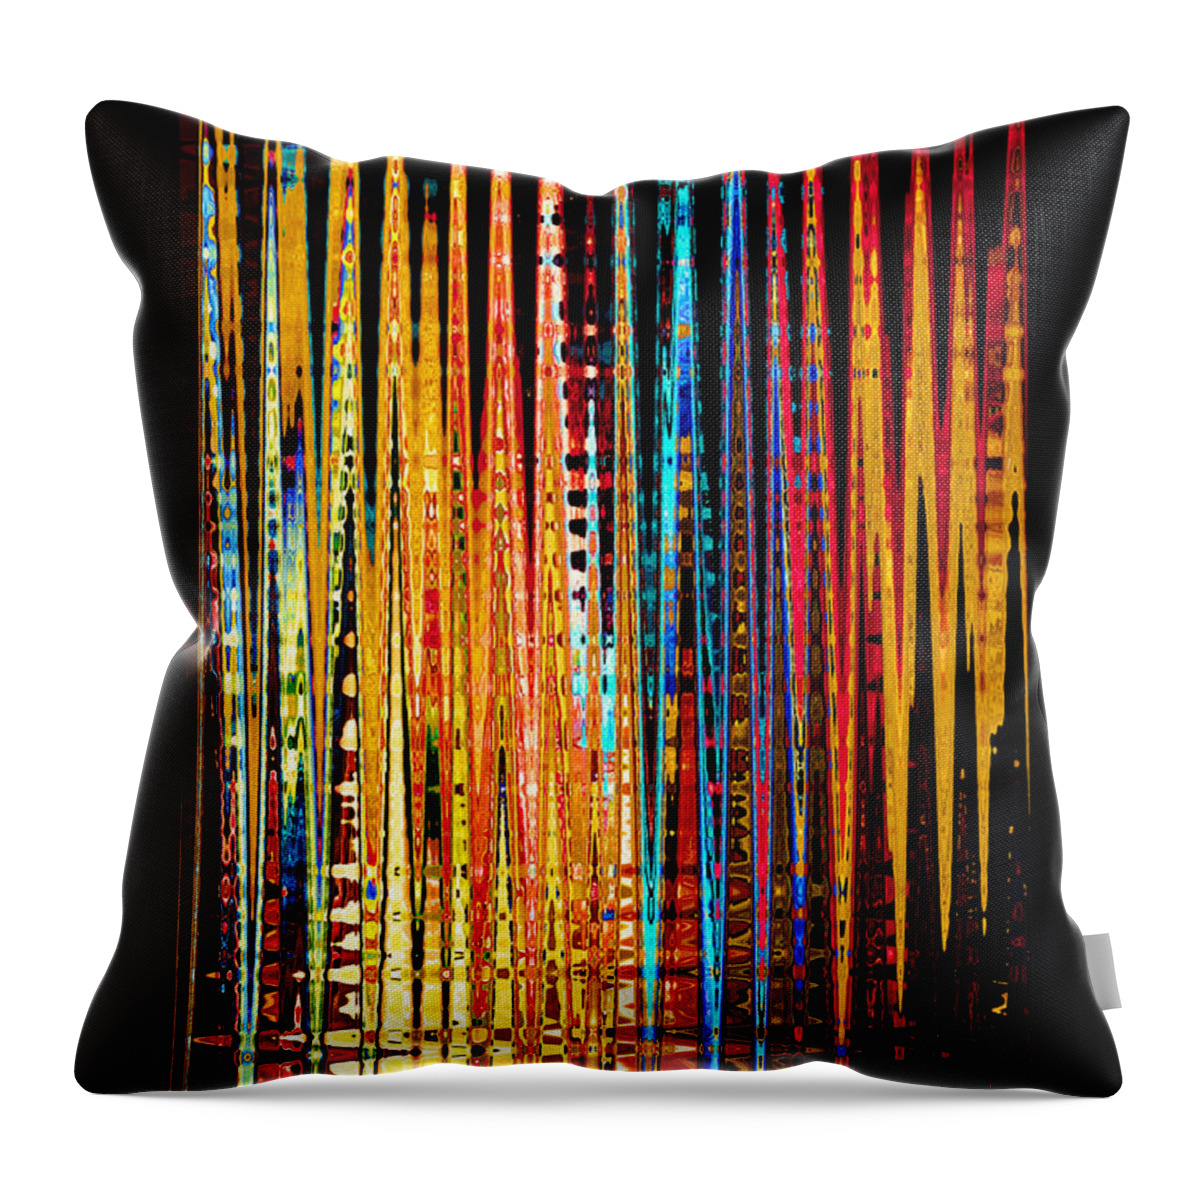 Lines Colors Flames Pattern Design Cross Crosshatch Plaid Throw Pillow featuring the digital art Flame Lines by Frances Miller